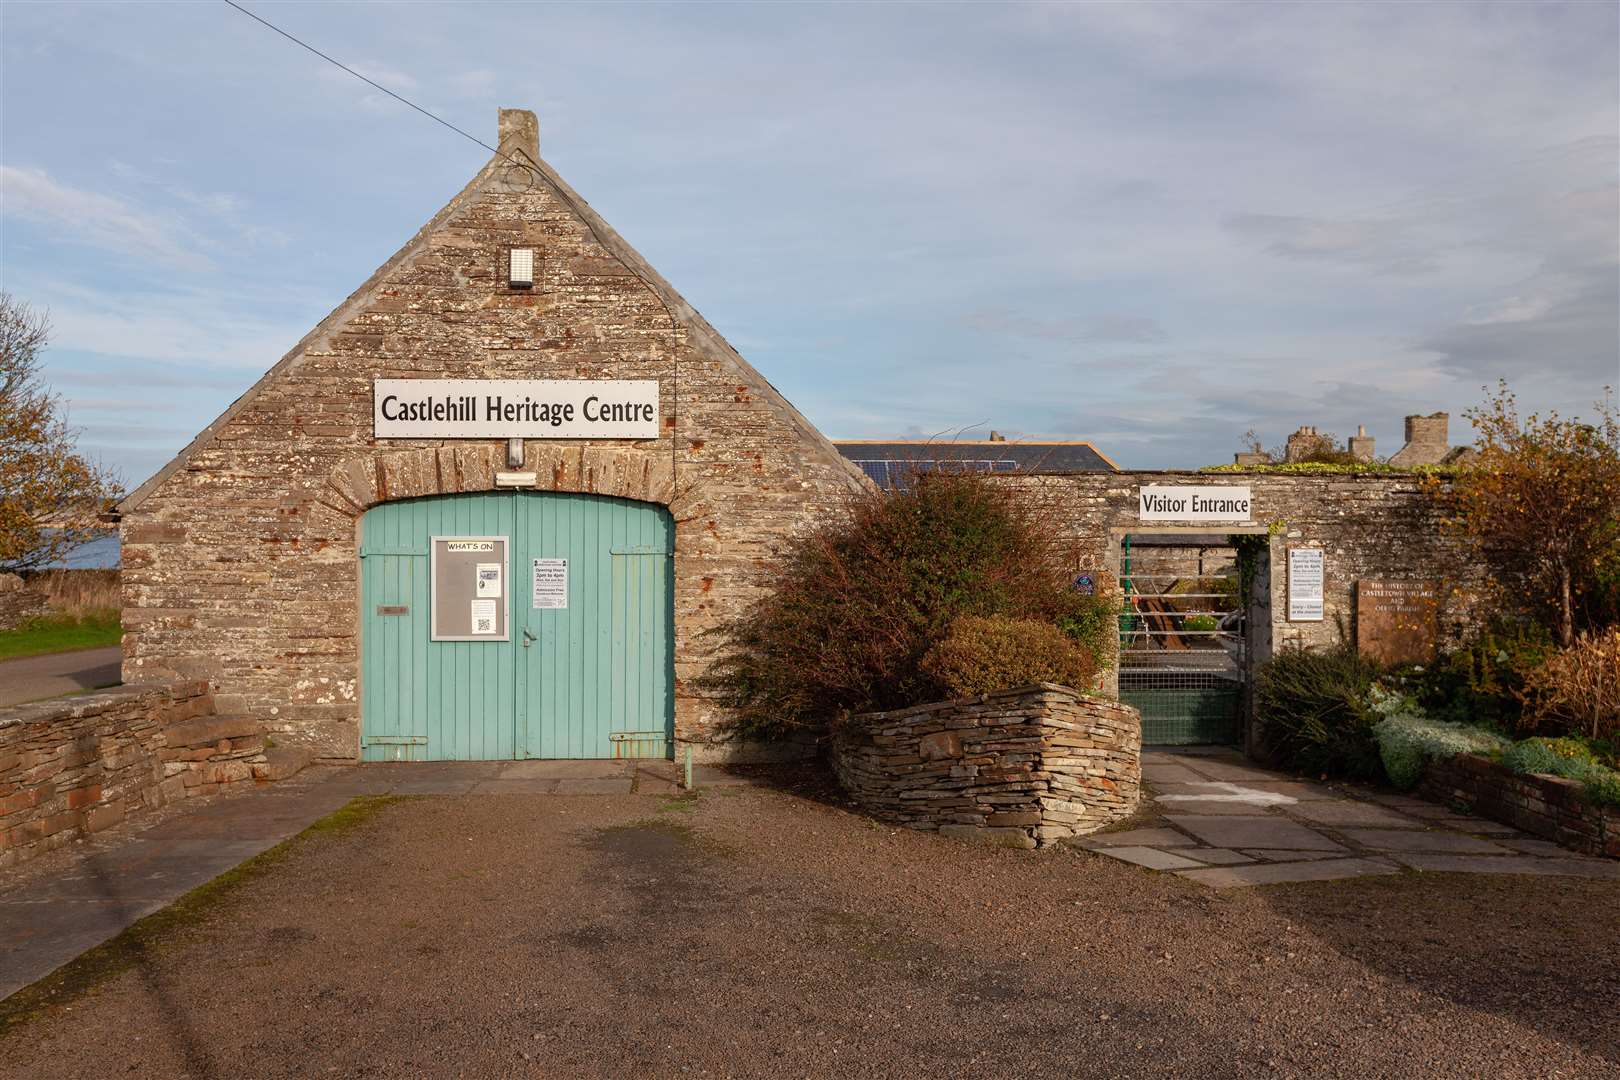 The exhibition is being staged at the Castlehill Heritage Centre on the outskirts of Castletown